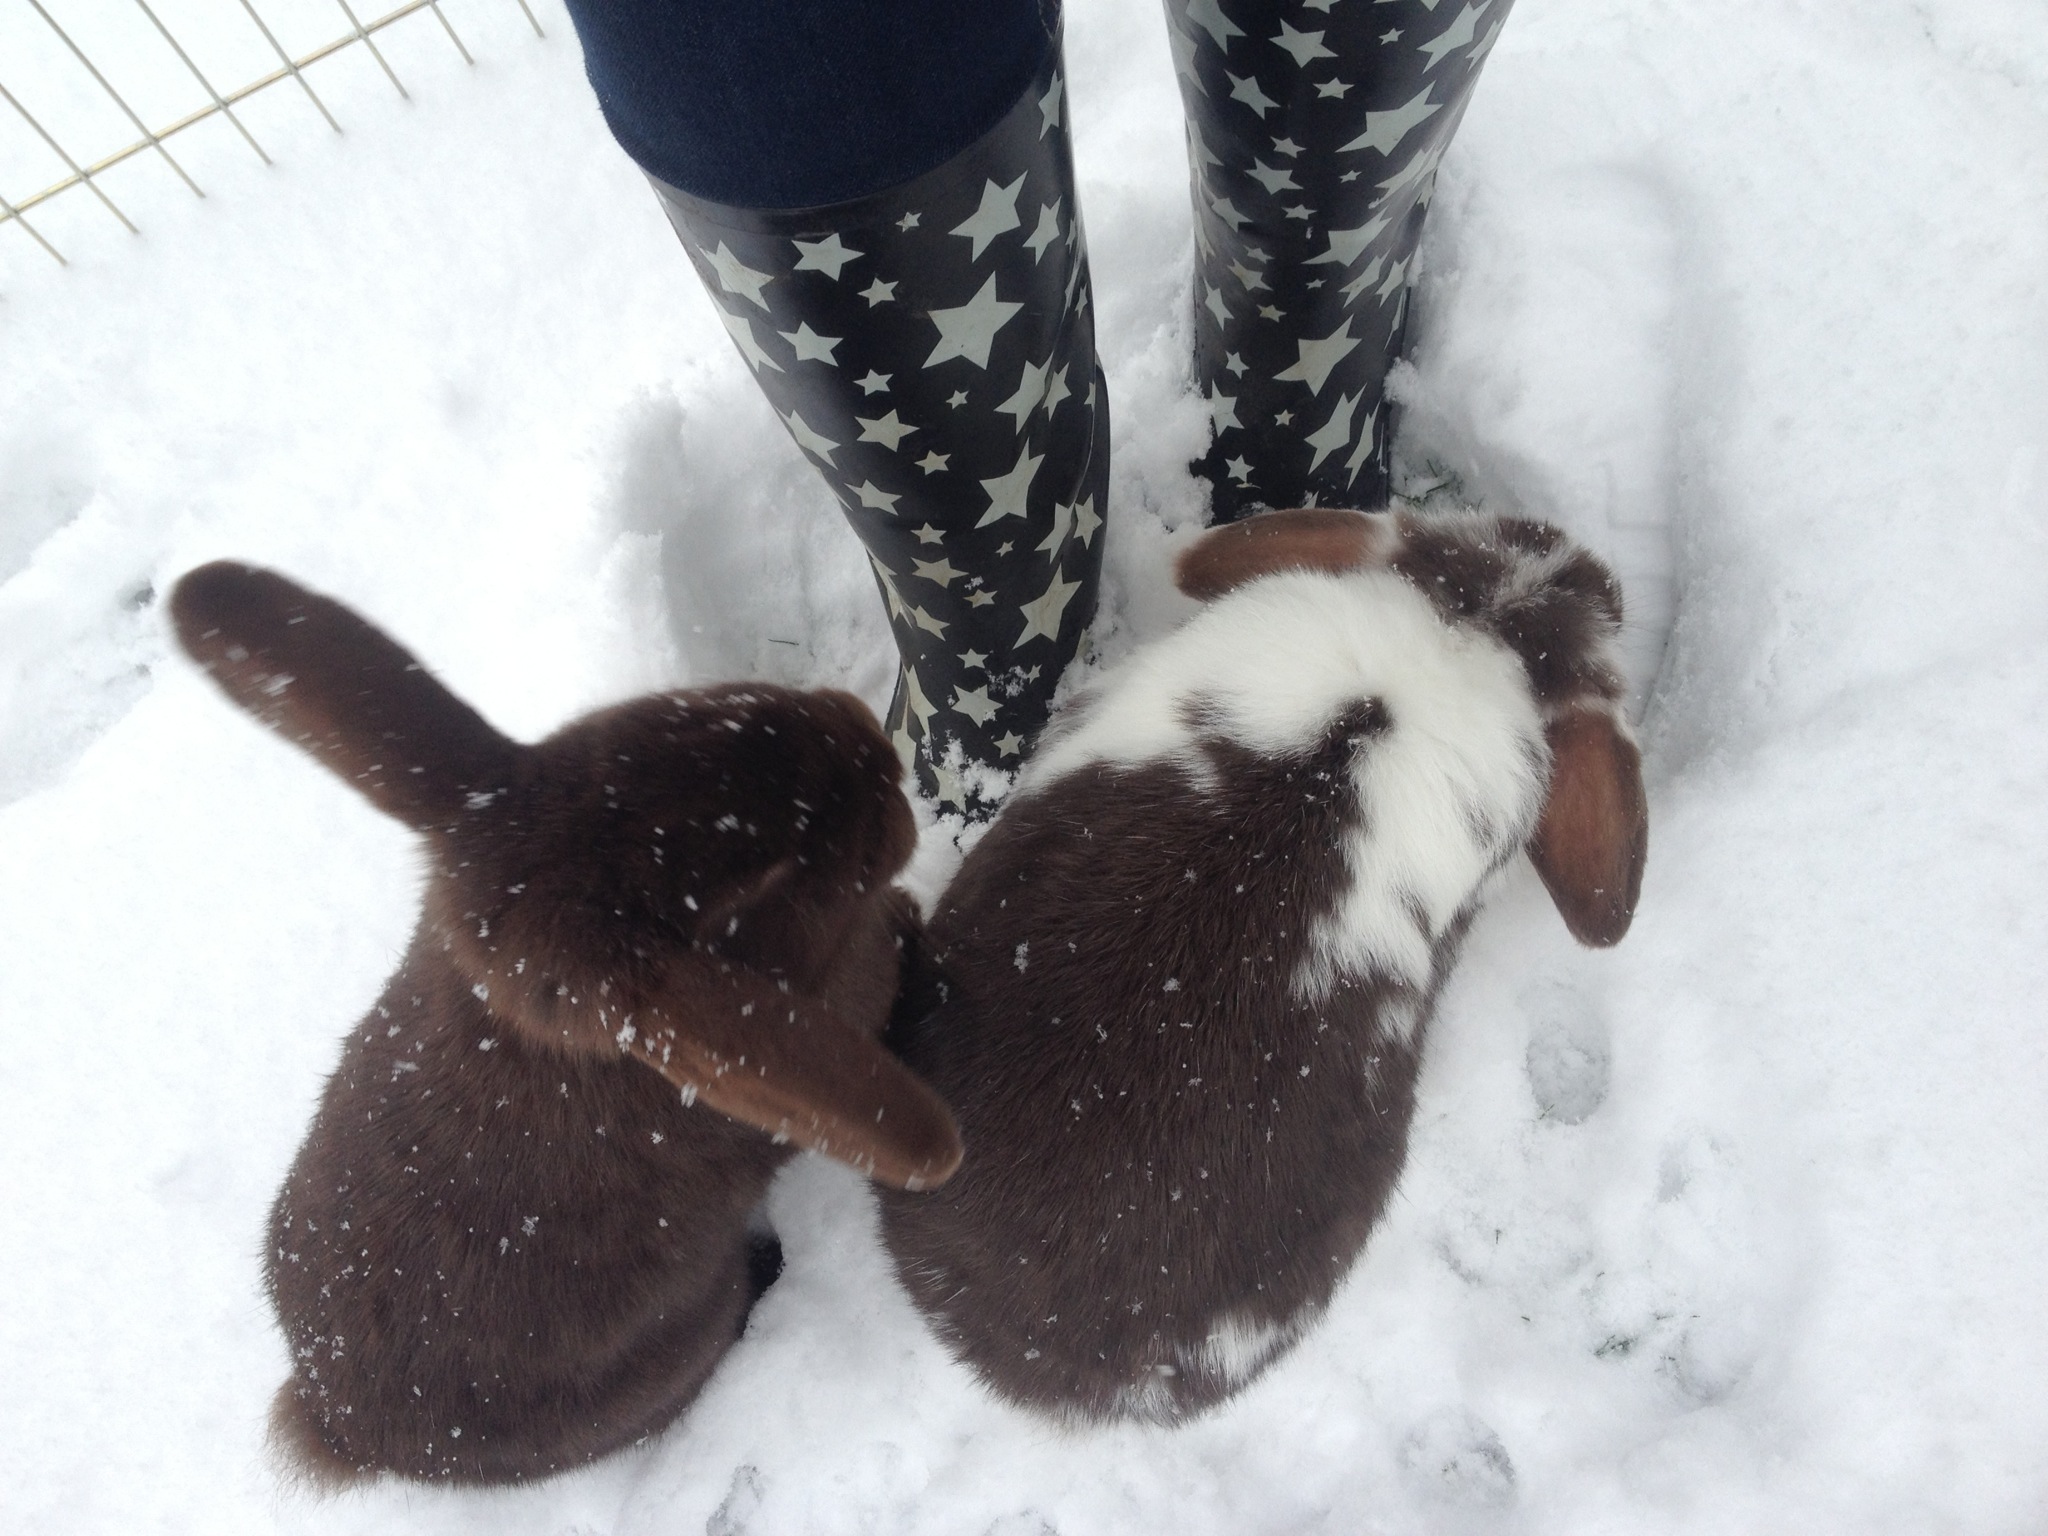 Bunnies Stick with Their Human in the Strange Snow